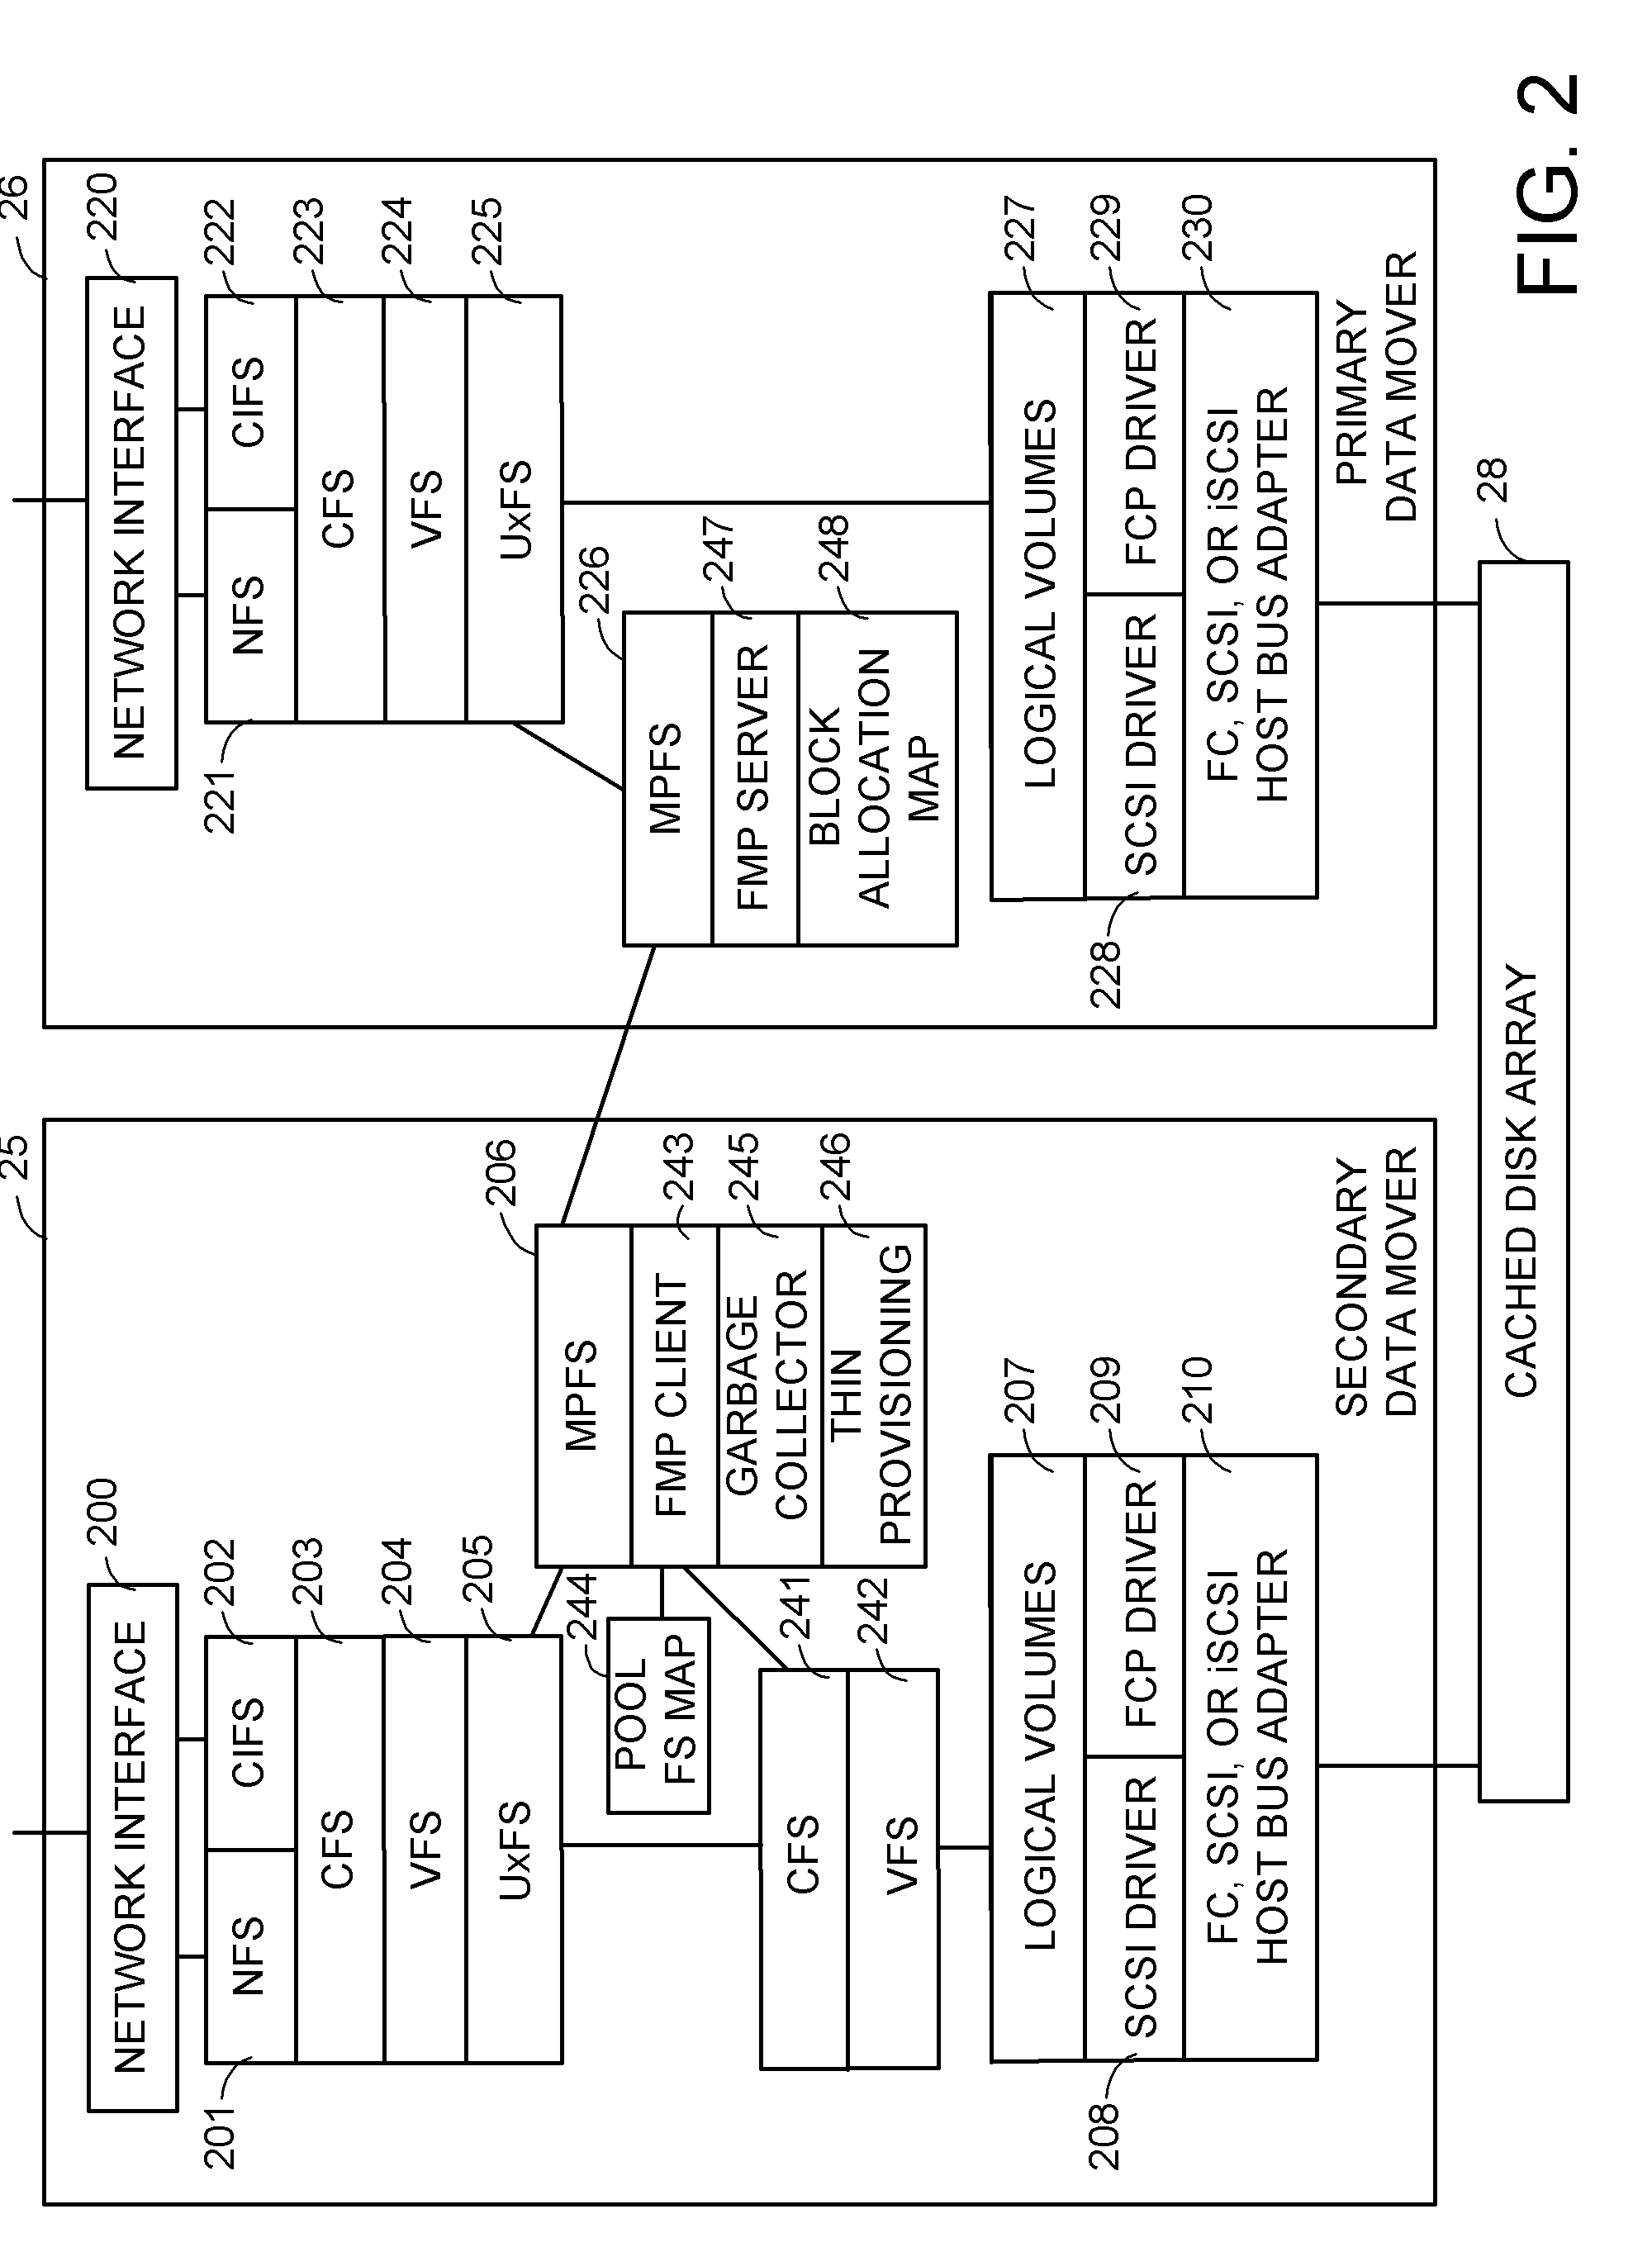 Storage array virtualization using a storage block mapping protocol client and server